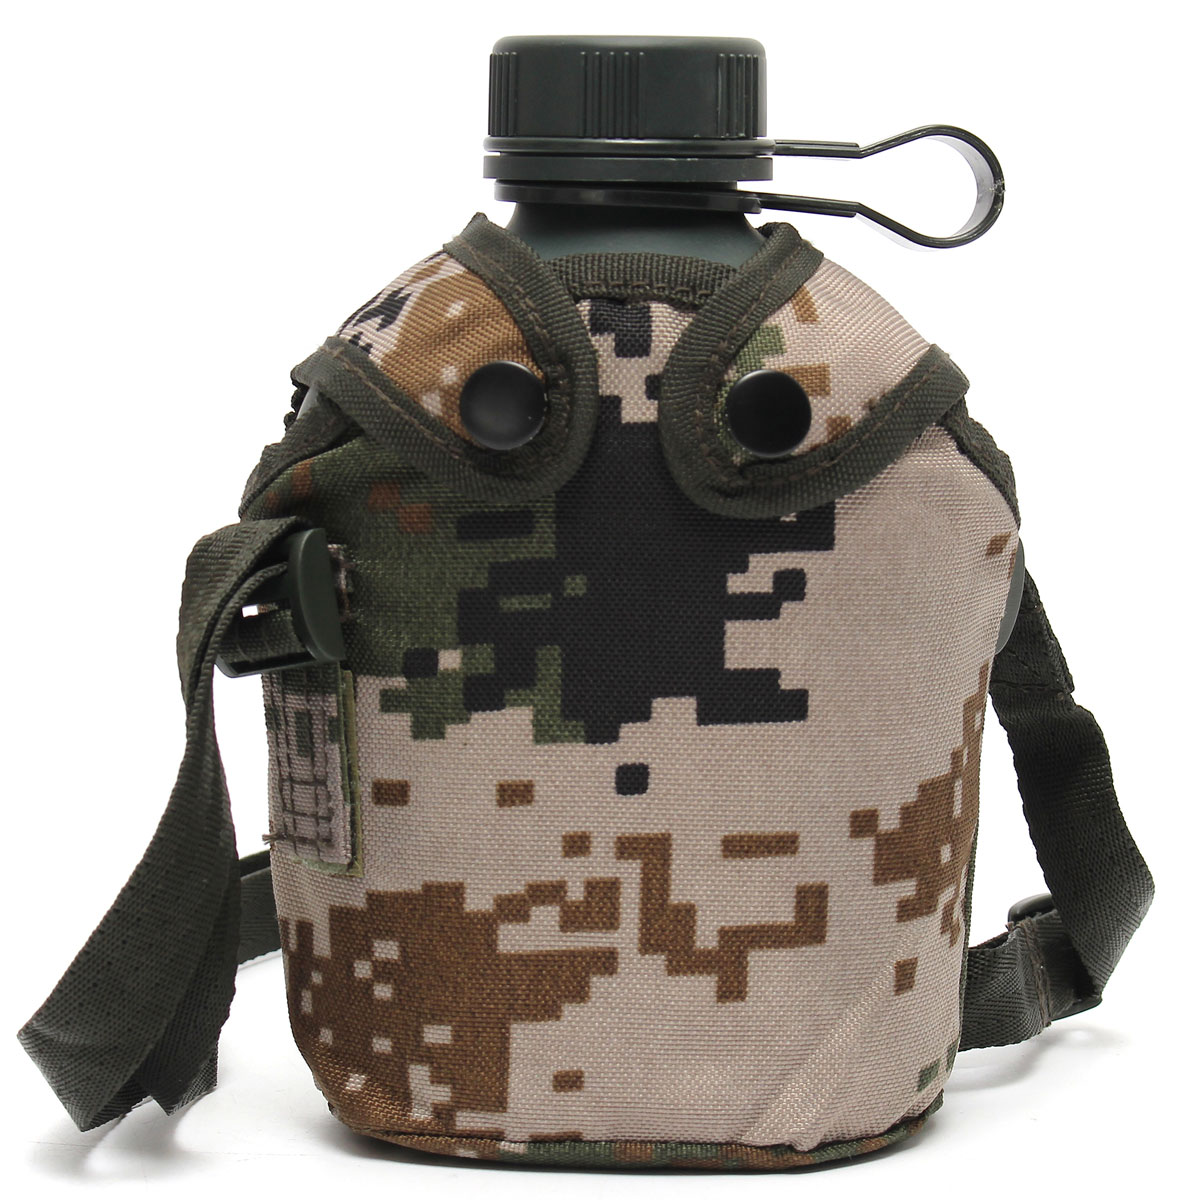 1L-Military-Tactical-Water-Bottle-Kettle-Army-Camo-Drinking-Bottle-For-Camping-Hiking-Hunting-1028661